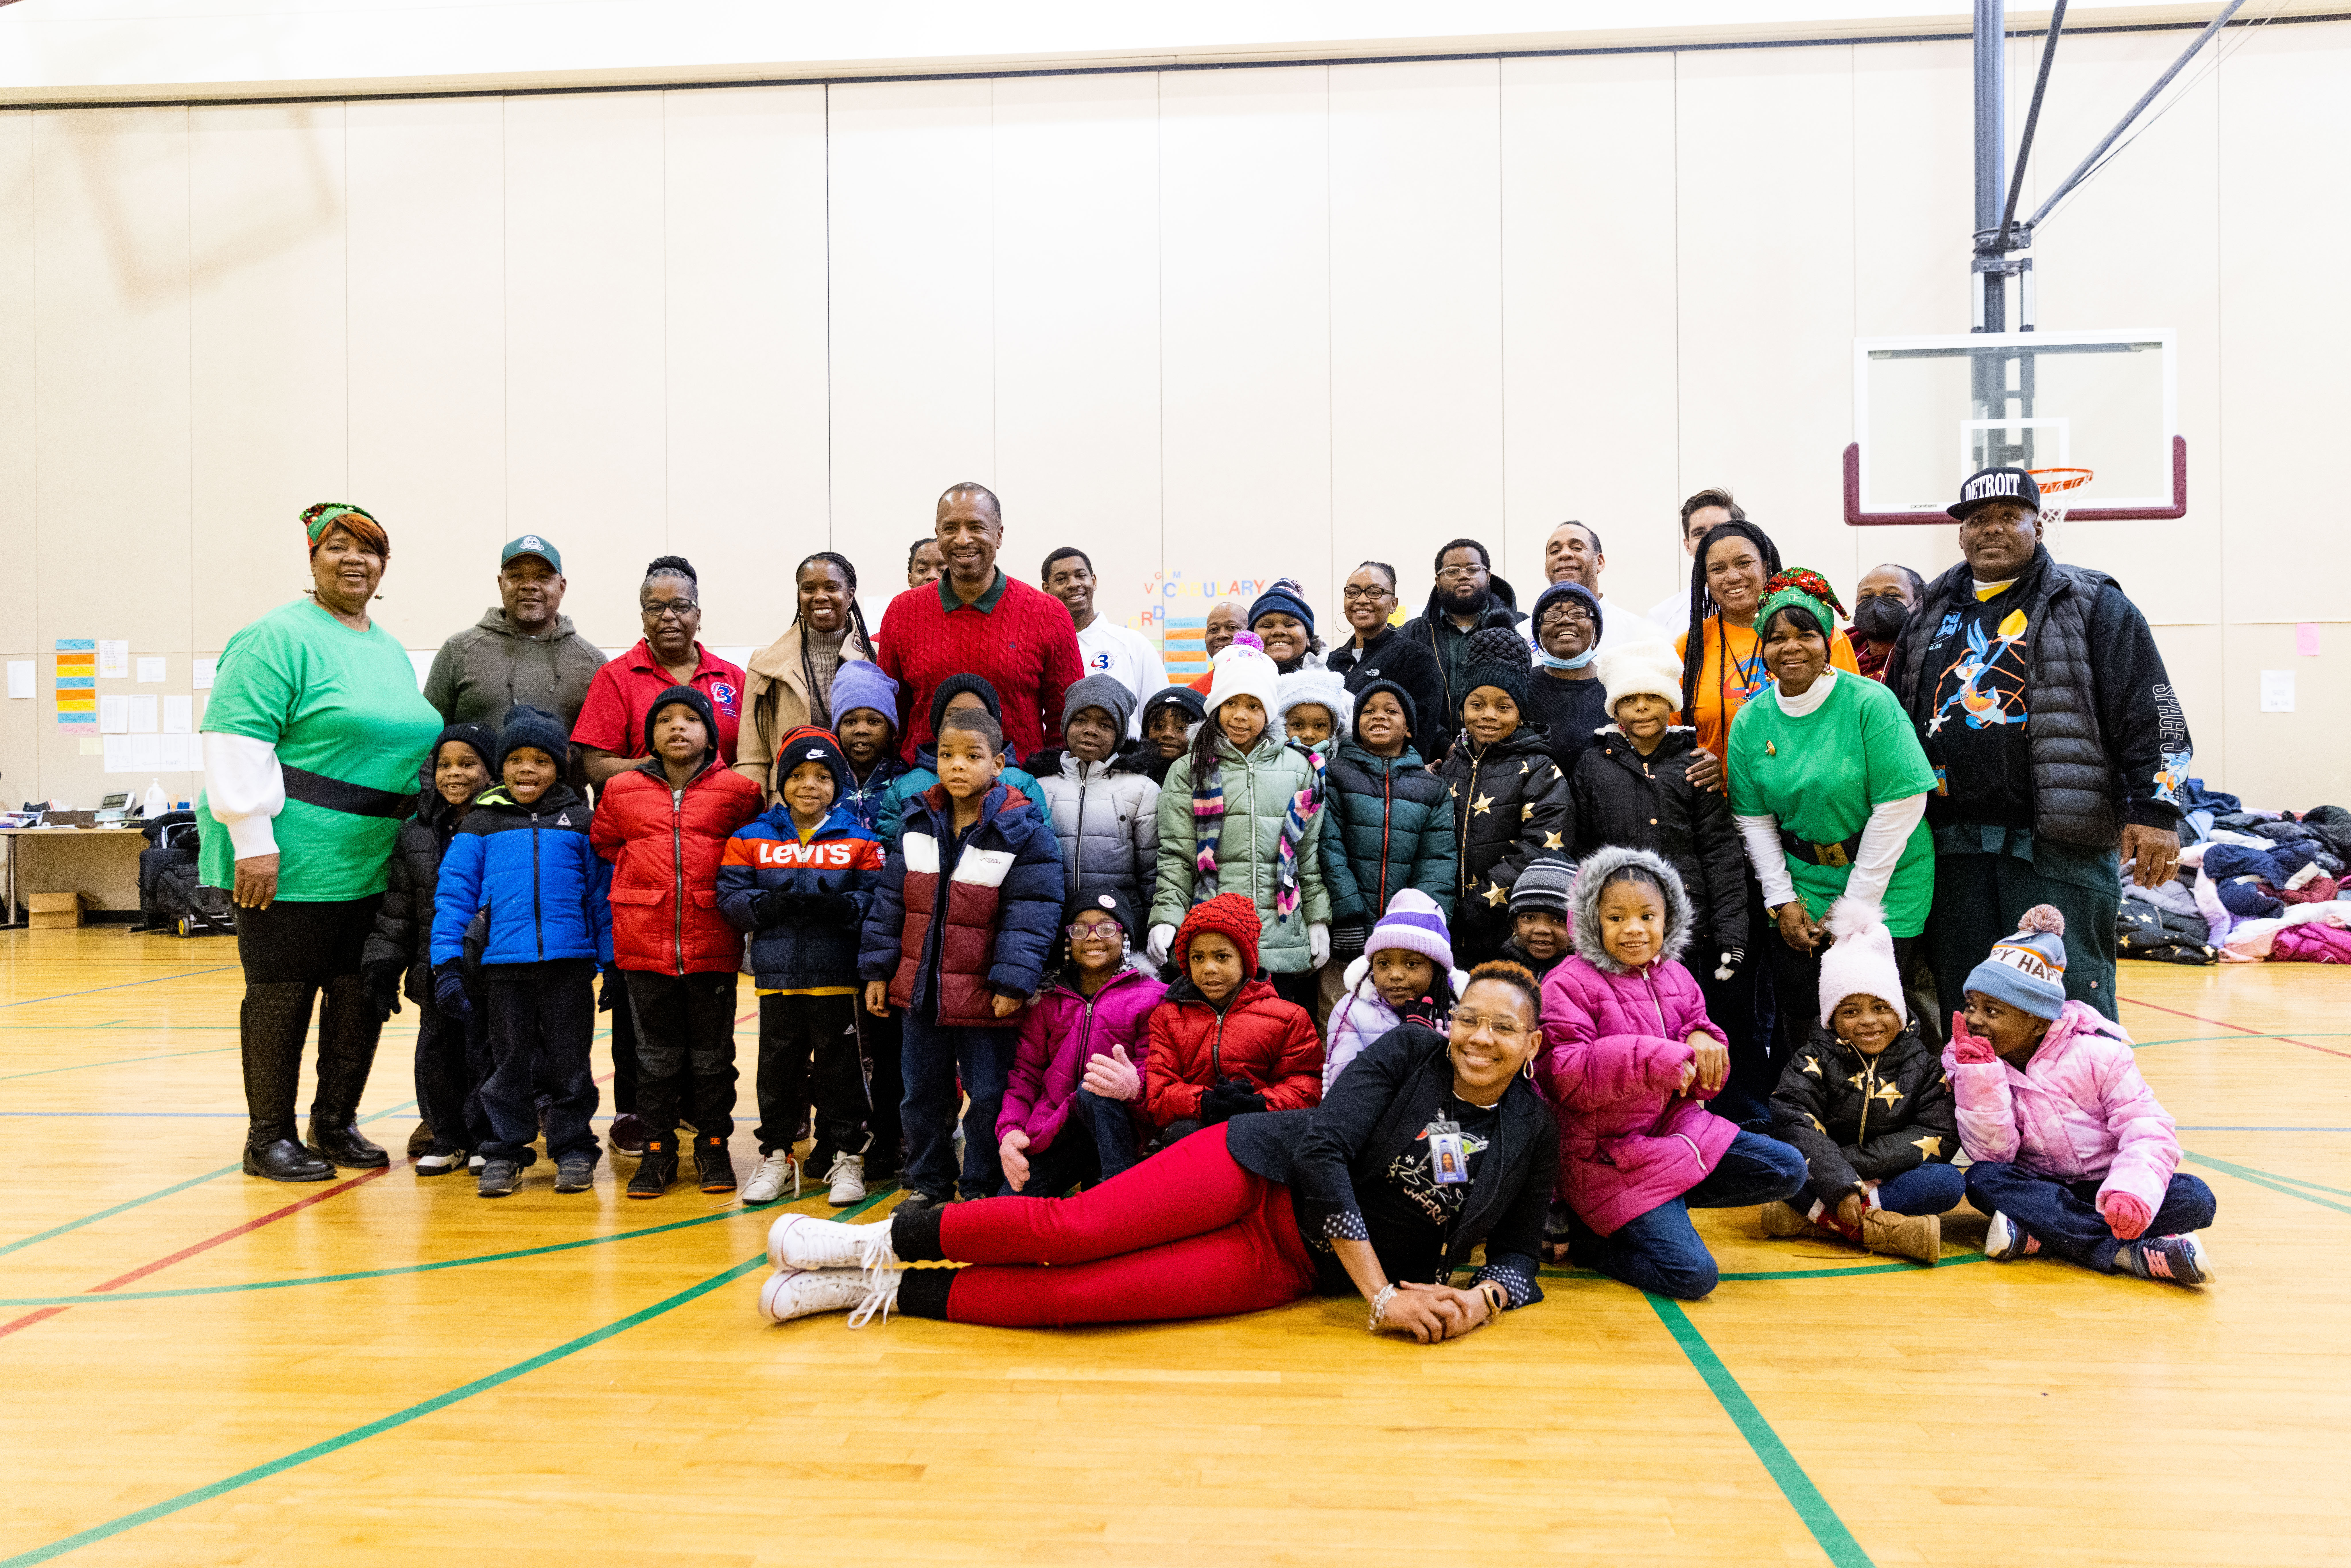 Councilman Scott Benson and Everyone posing with the kids and their new coats